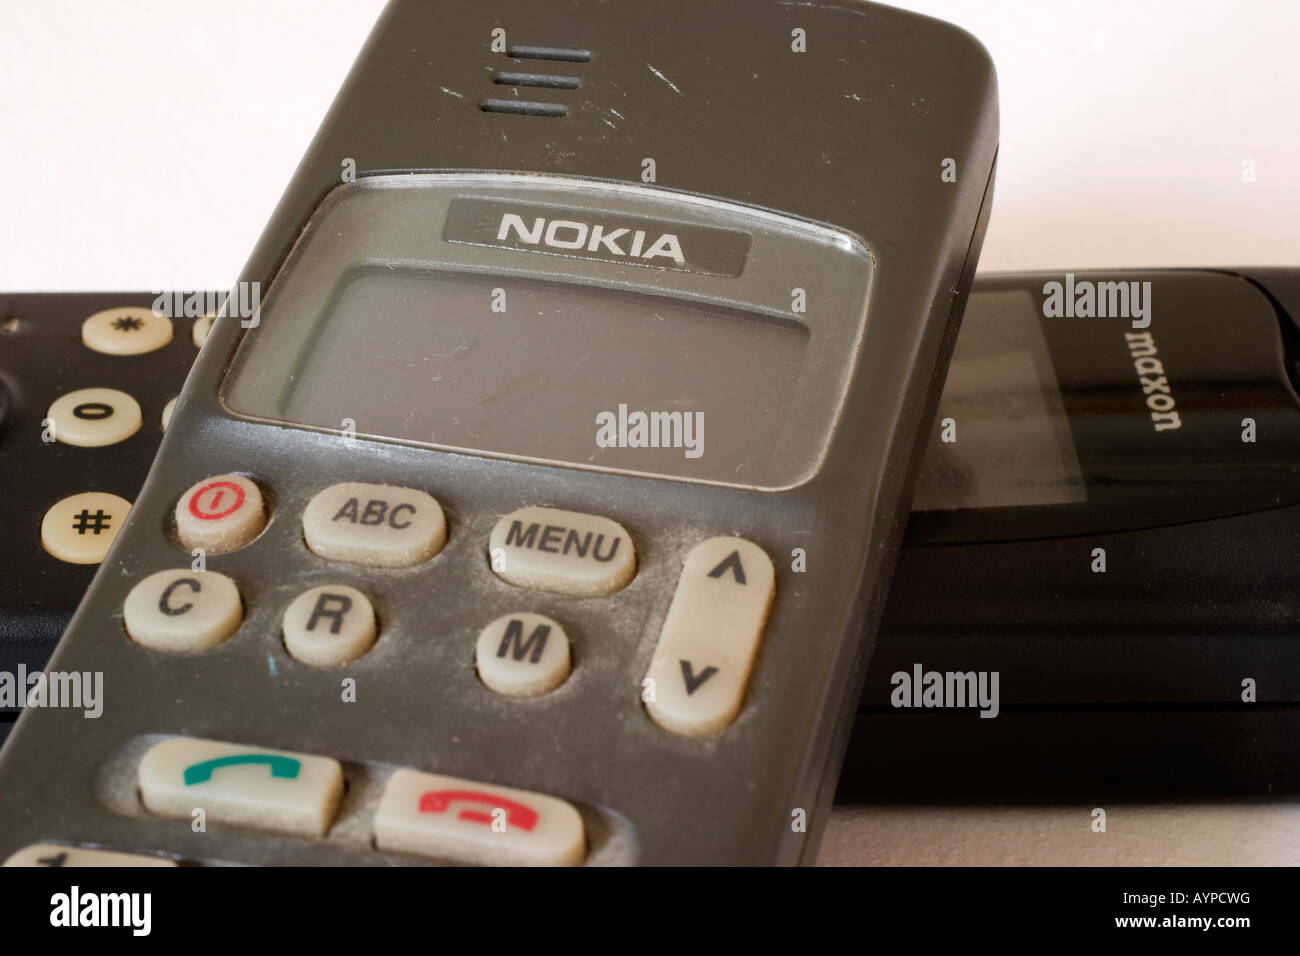 Ancient dusty Nokia mobile phone Stock Photo